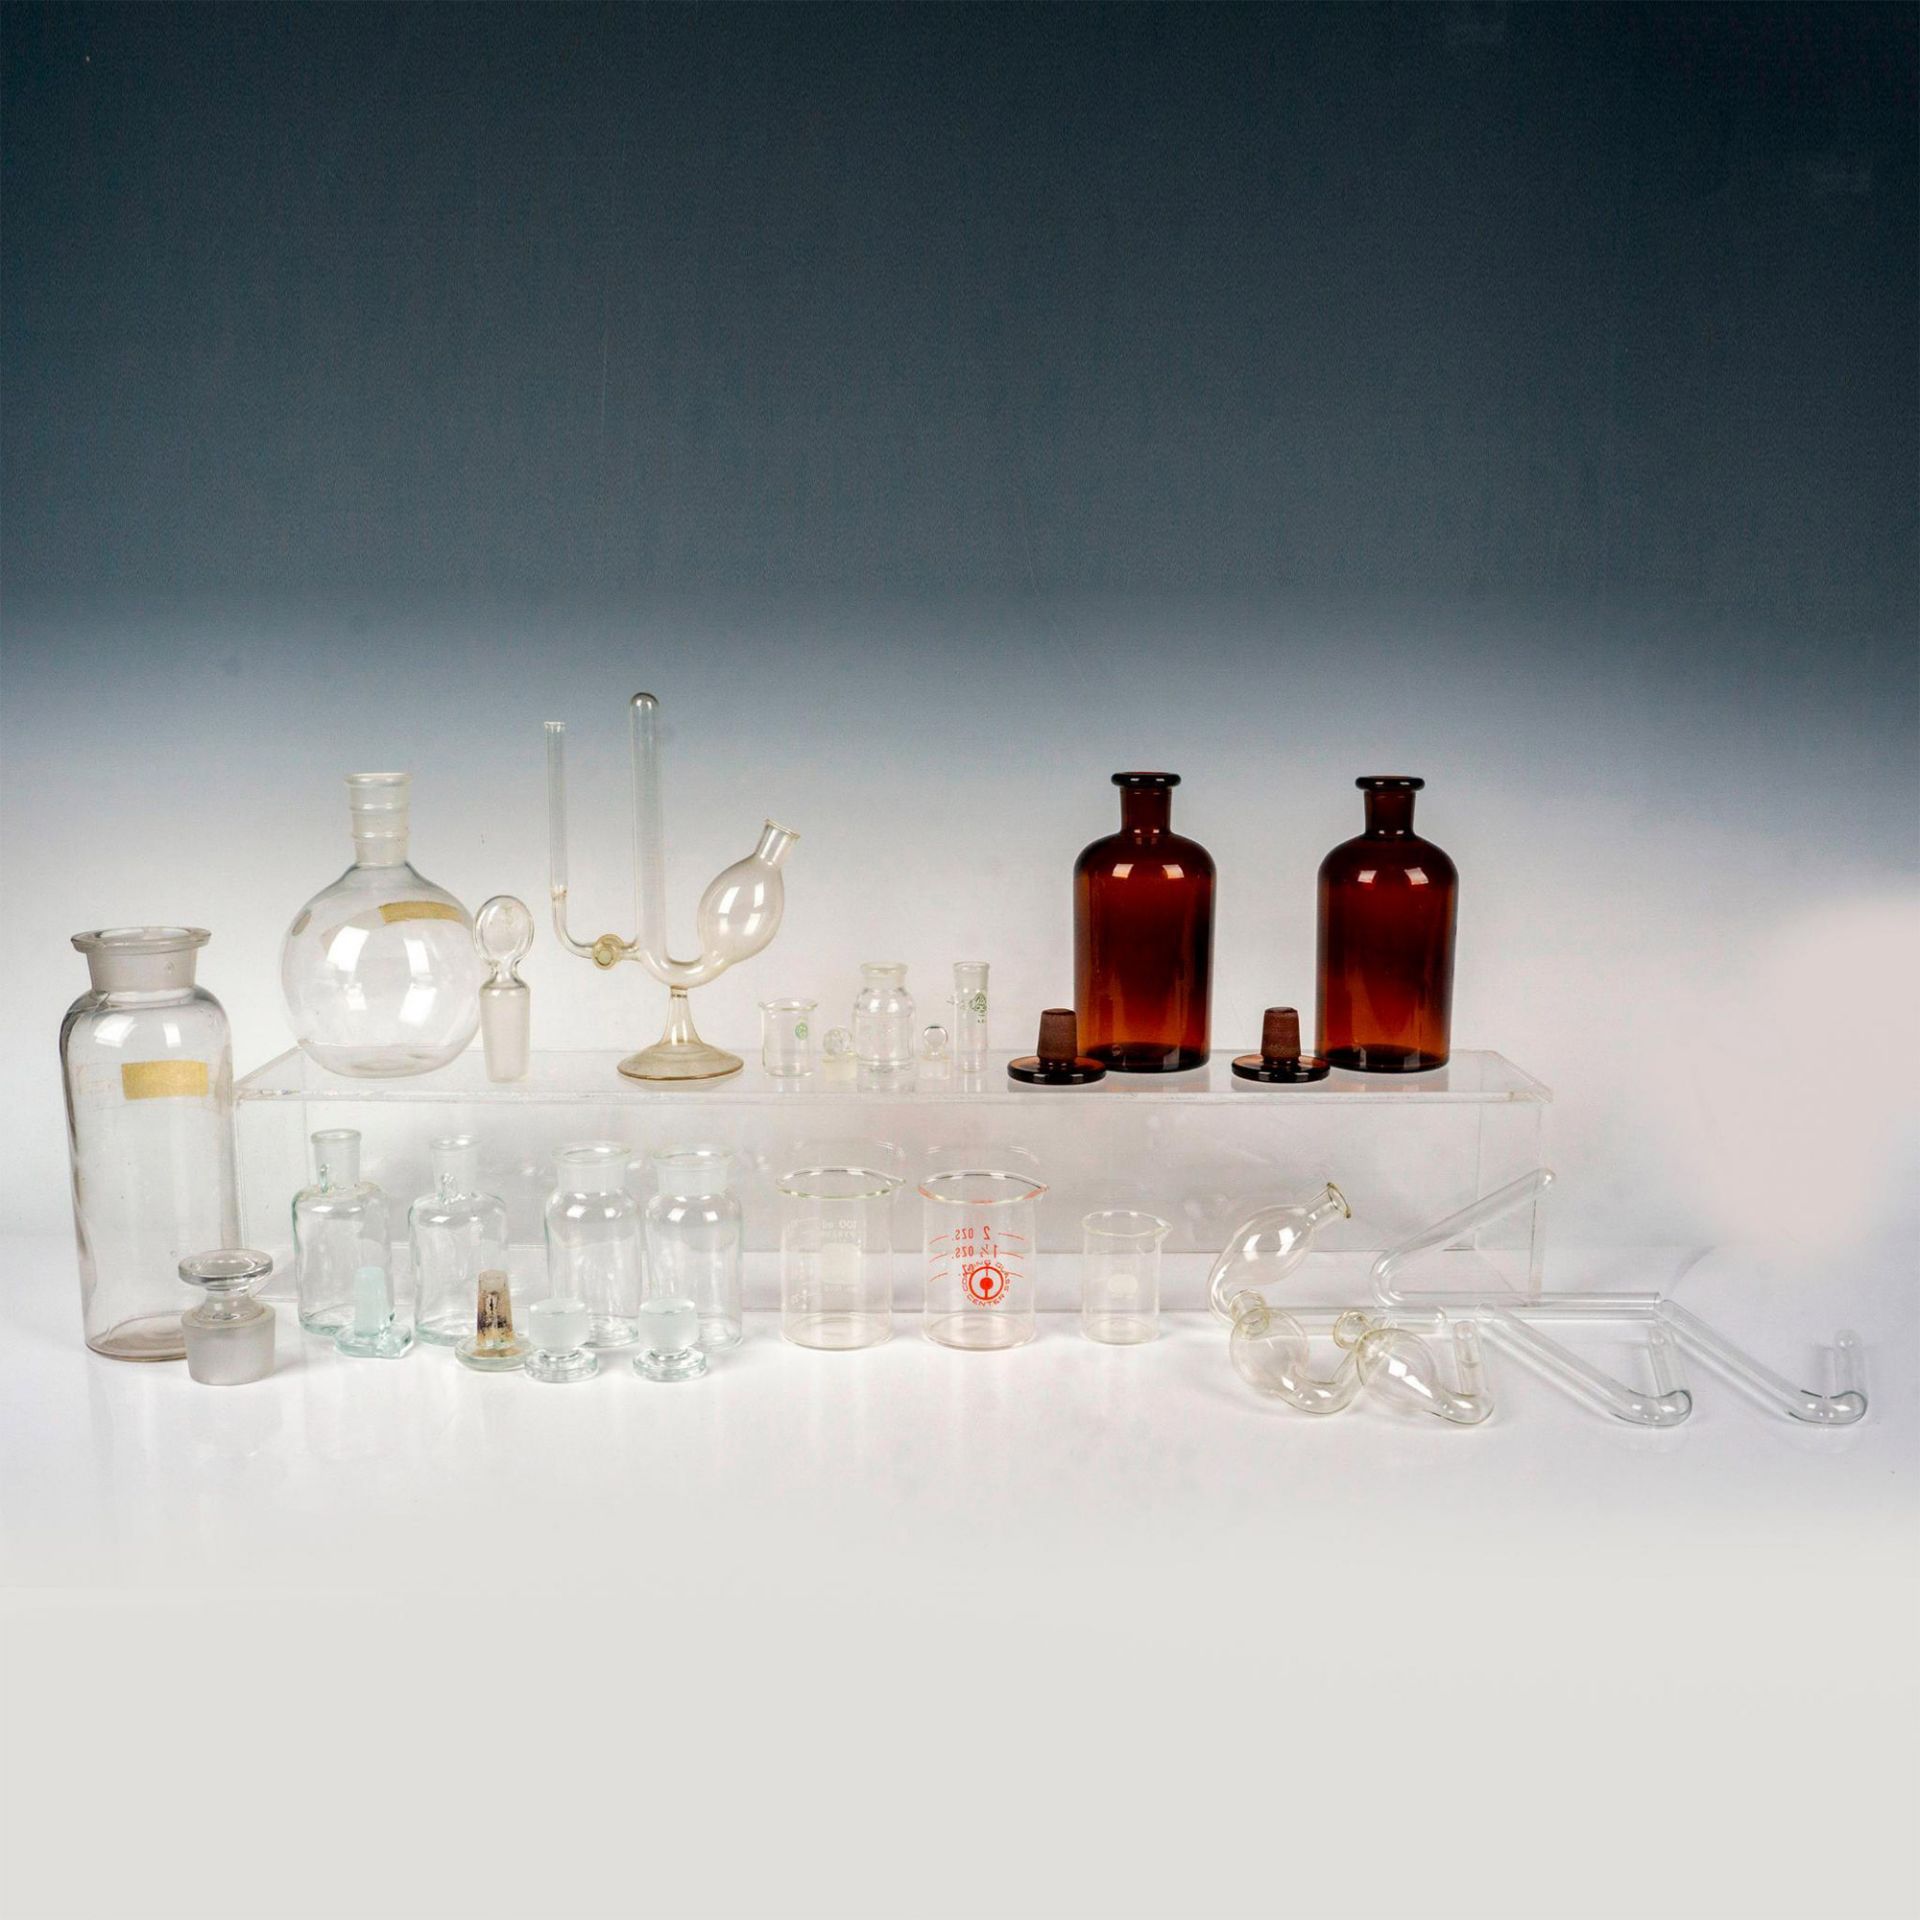 21pc Vintage Laboratory Glassware Bottles and Tubes - Image 2 of 2